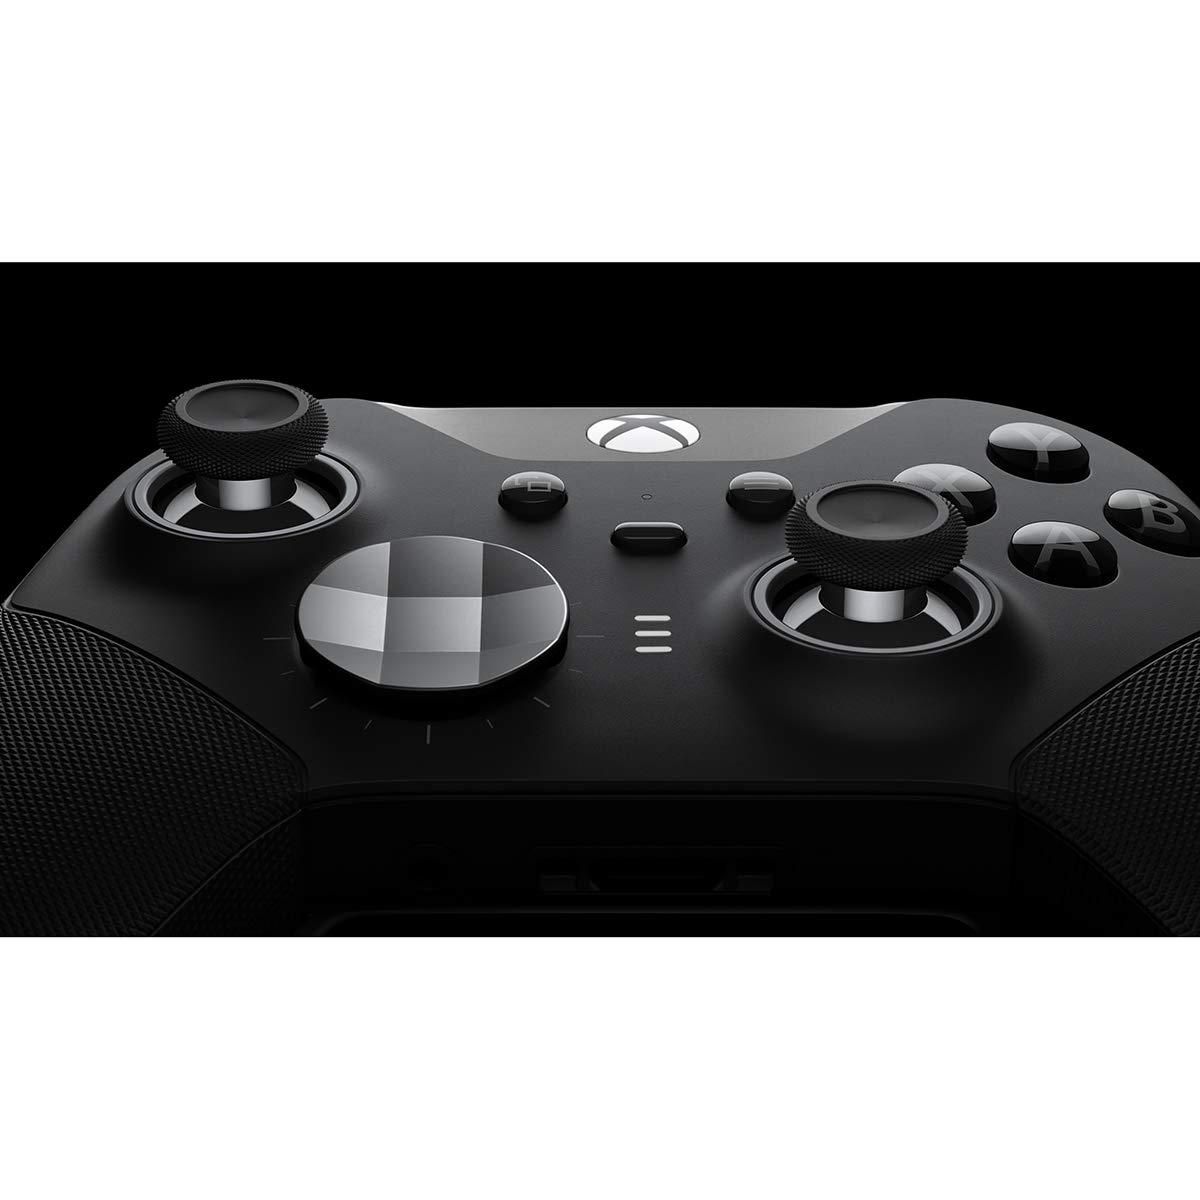 Elite Series 2 Controller for Xbox featured image